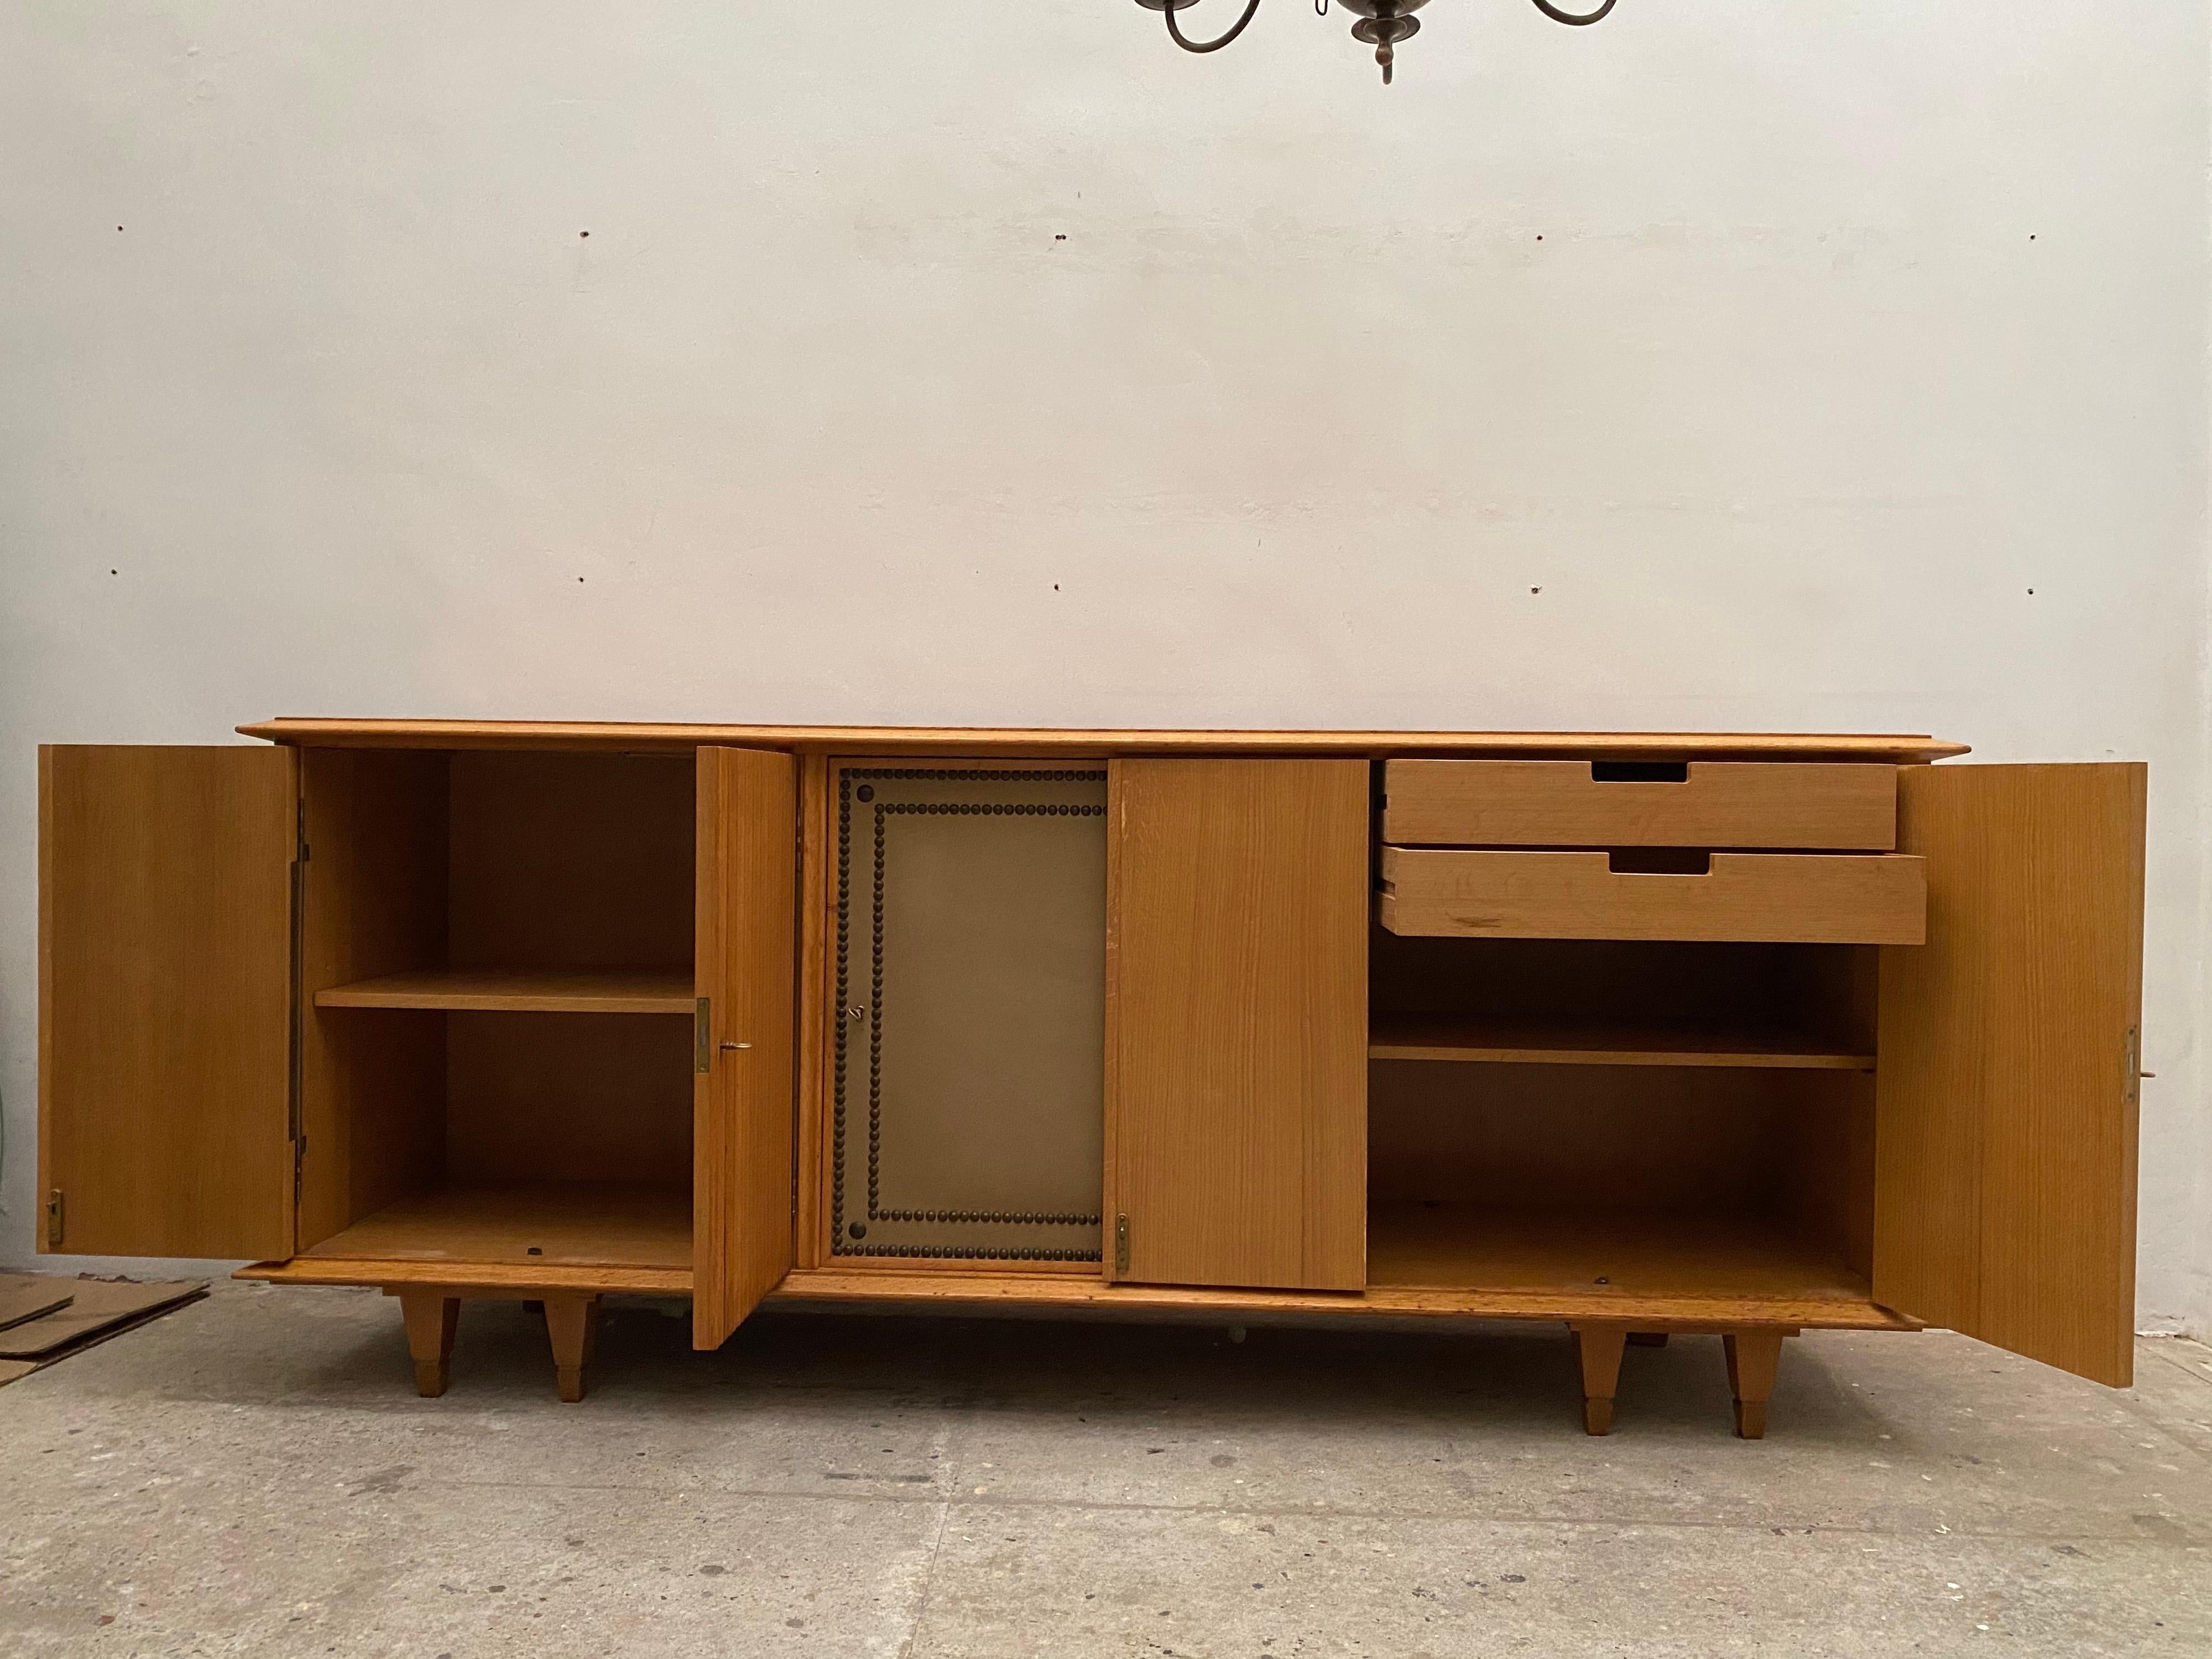 Mid-20th Century Brutalist Large Sideboard with Slatted Front 1940s De Coene, Belgium For Sale